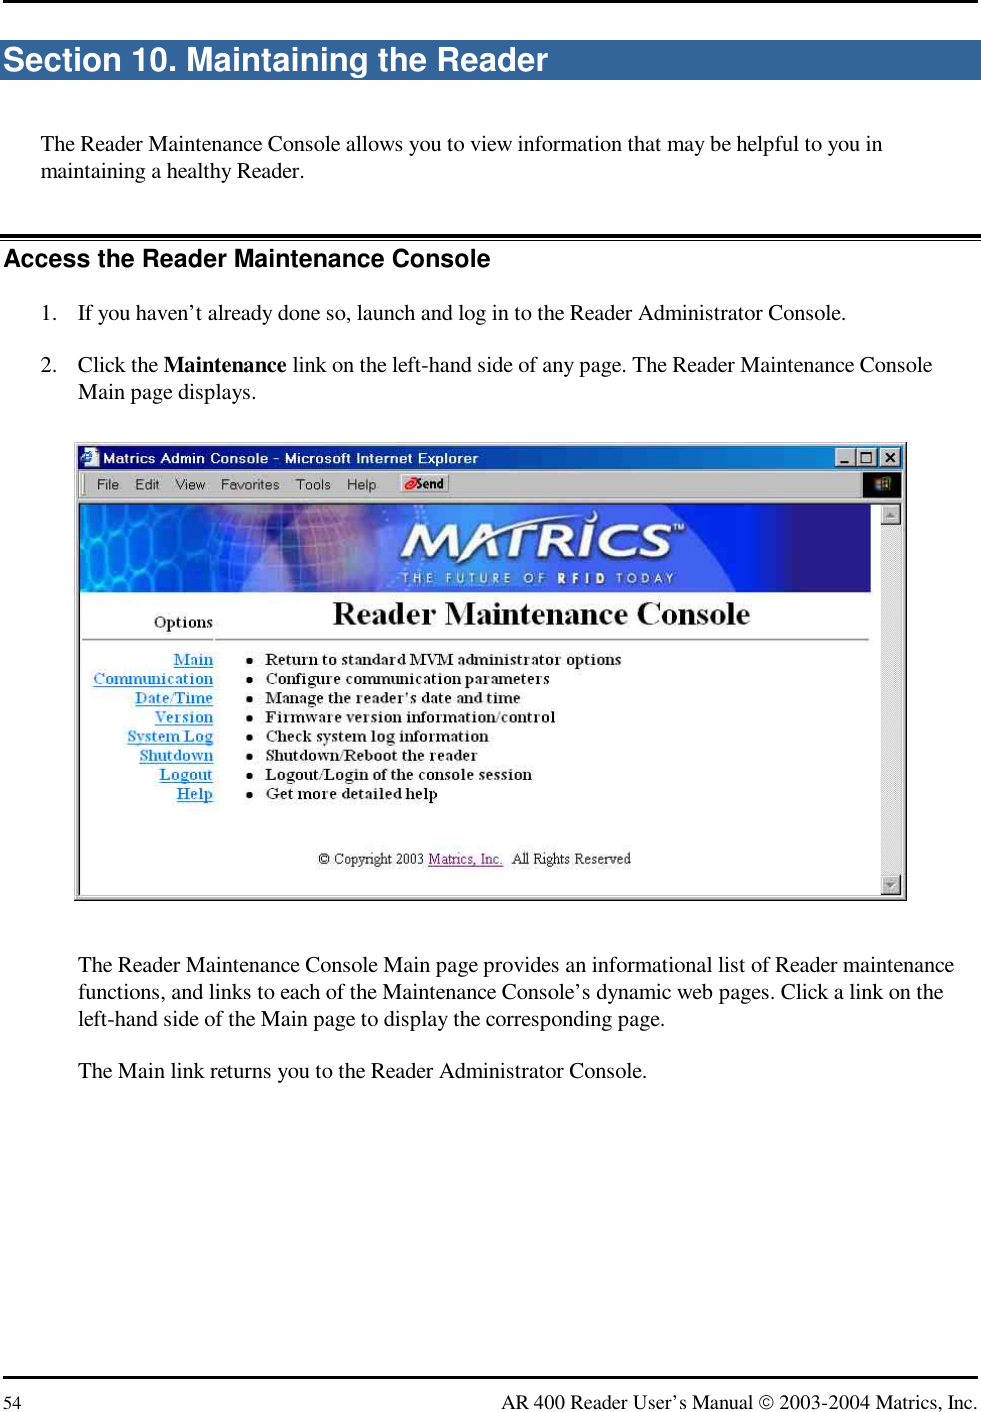  54  AR 400 Reader User’s Manual  2003-2004 Matrics, Inc. Section 10. Maintaining the Reader The Reader Maintenance Console allows you to view information that may be helpful to you in maintaining a healthy Reader. Access the Reader Maintenance Console 1.  If you haven’t already done so, launch and log in to the Reader Administrator Console. 2. Click the Maintenance link on the left-hand side of any page. The Reader Maintenance Console Main page displays.  The Reader Maintenance Console Main page provides an informational list of Reader maintenance functions, and links to each of the Maintenance Console’s dynamic web pages. Click a link on the left-hand side of the Main page to display the corresponding page. The Main link returns you to the Reader Administrator Console. 